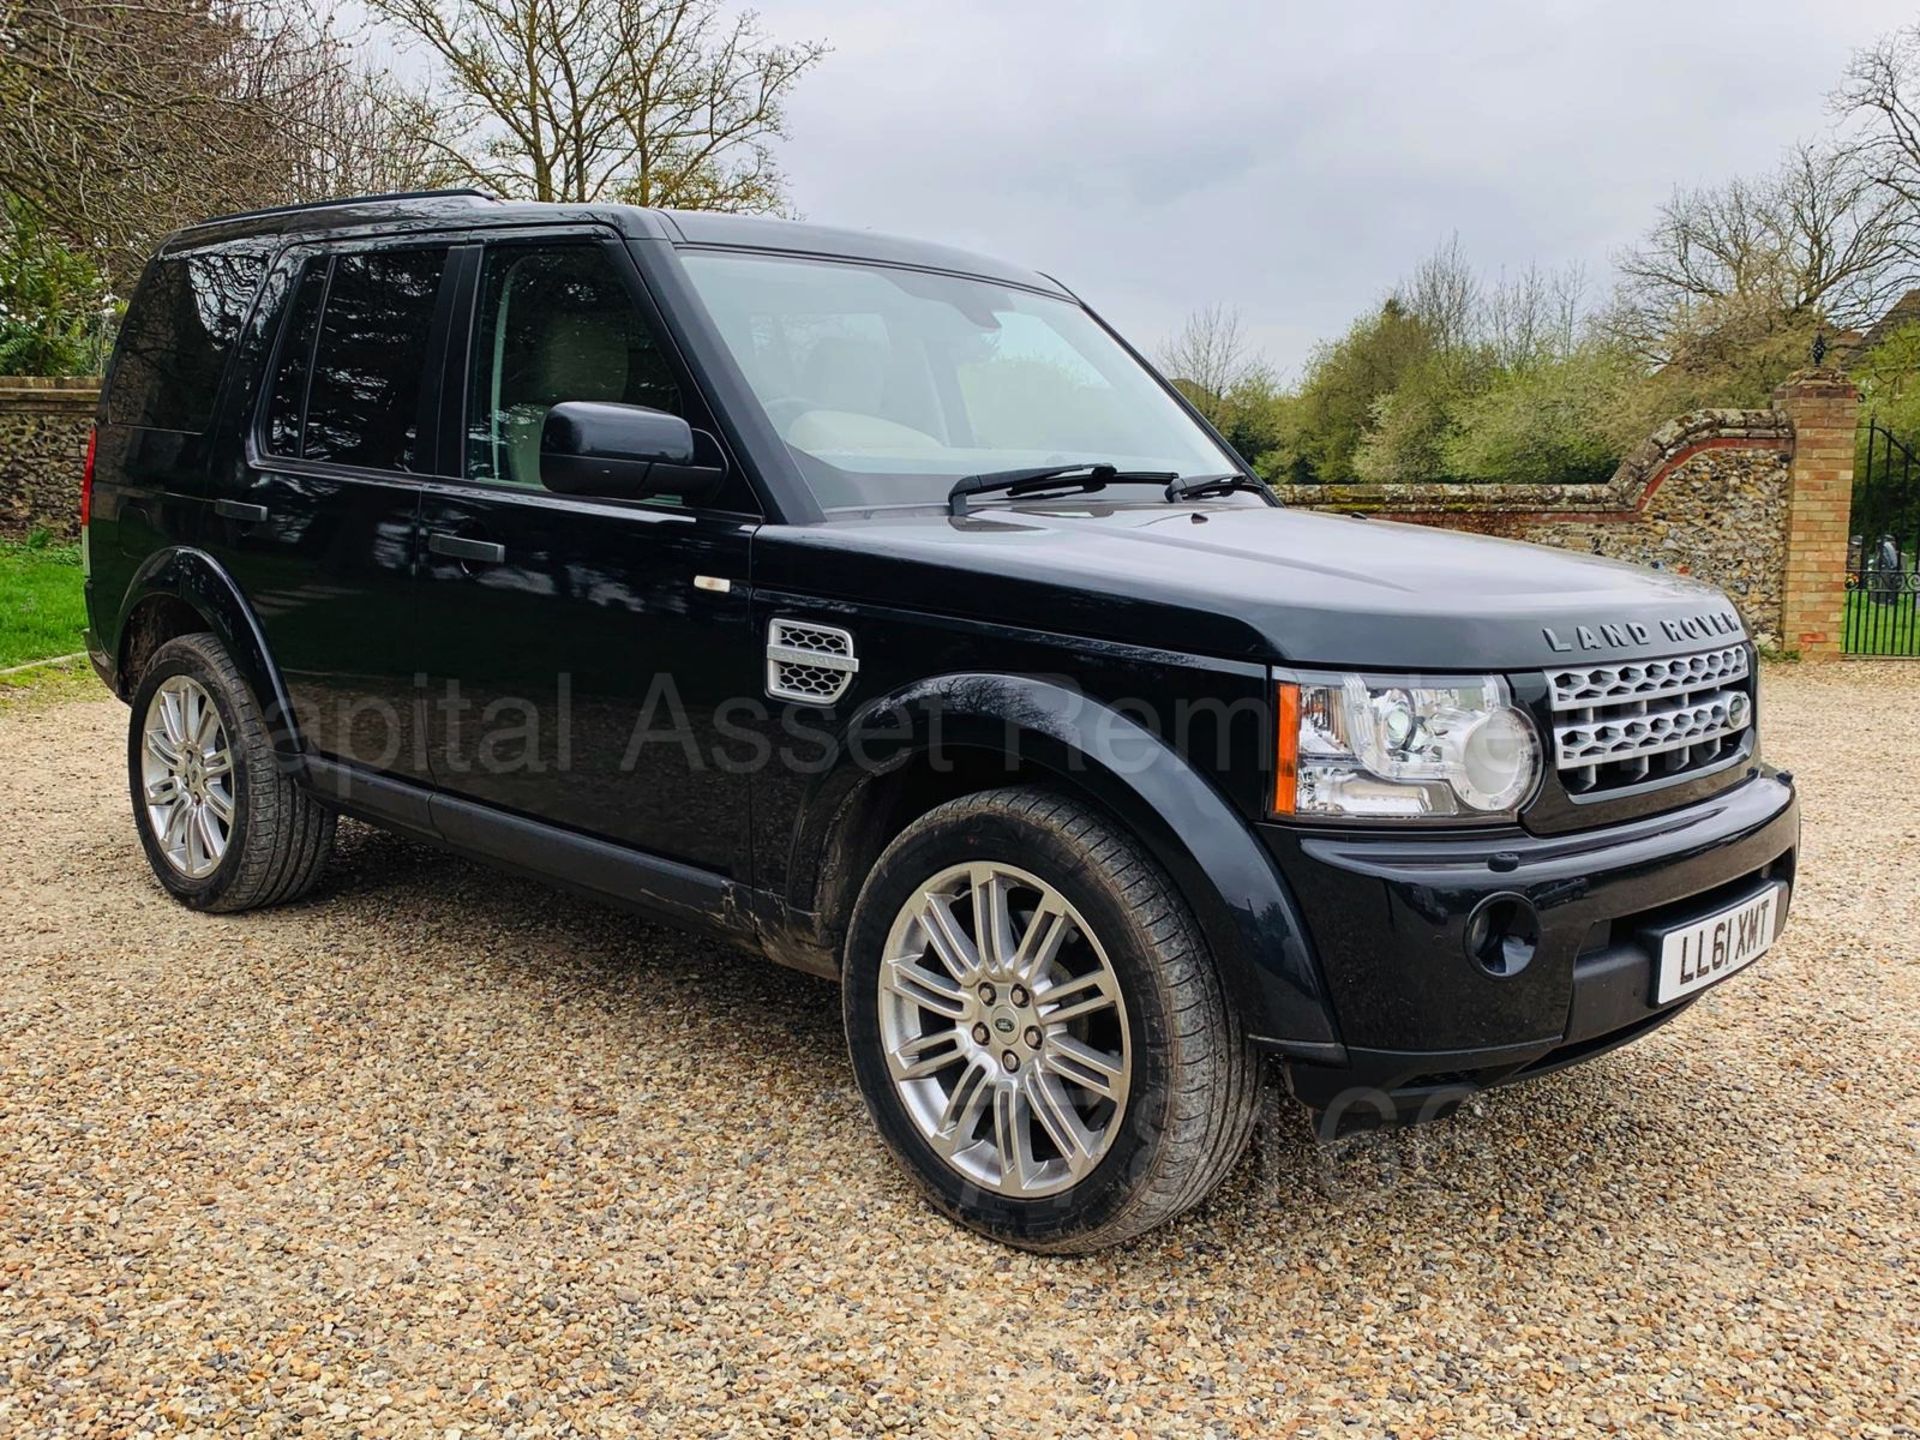 LAND ROVER DISCOVERY *HSE EDITION* 7 SEATER SUV (2012 MODEL) '3.0 SDV6- 8 SPEED AUTO' **HUGE SPEC** - Image 2 of 48